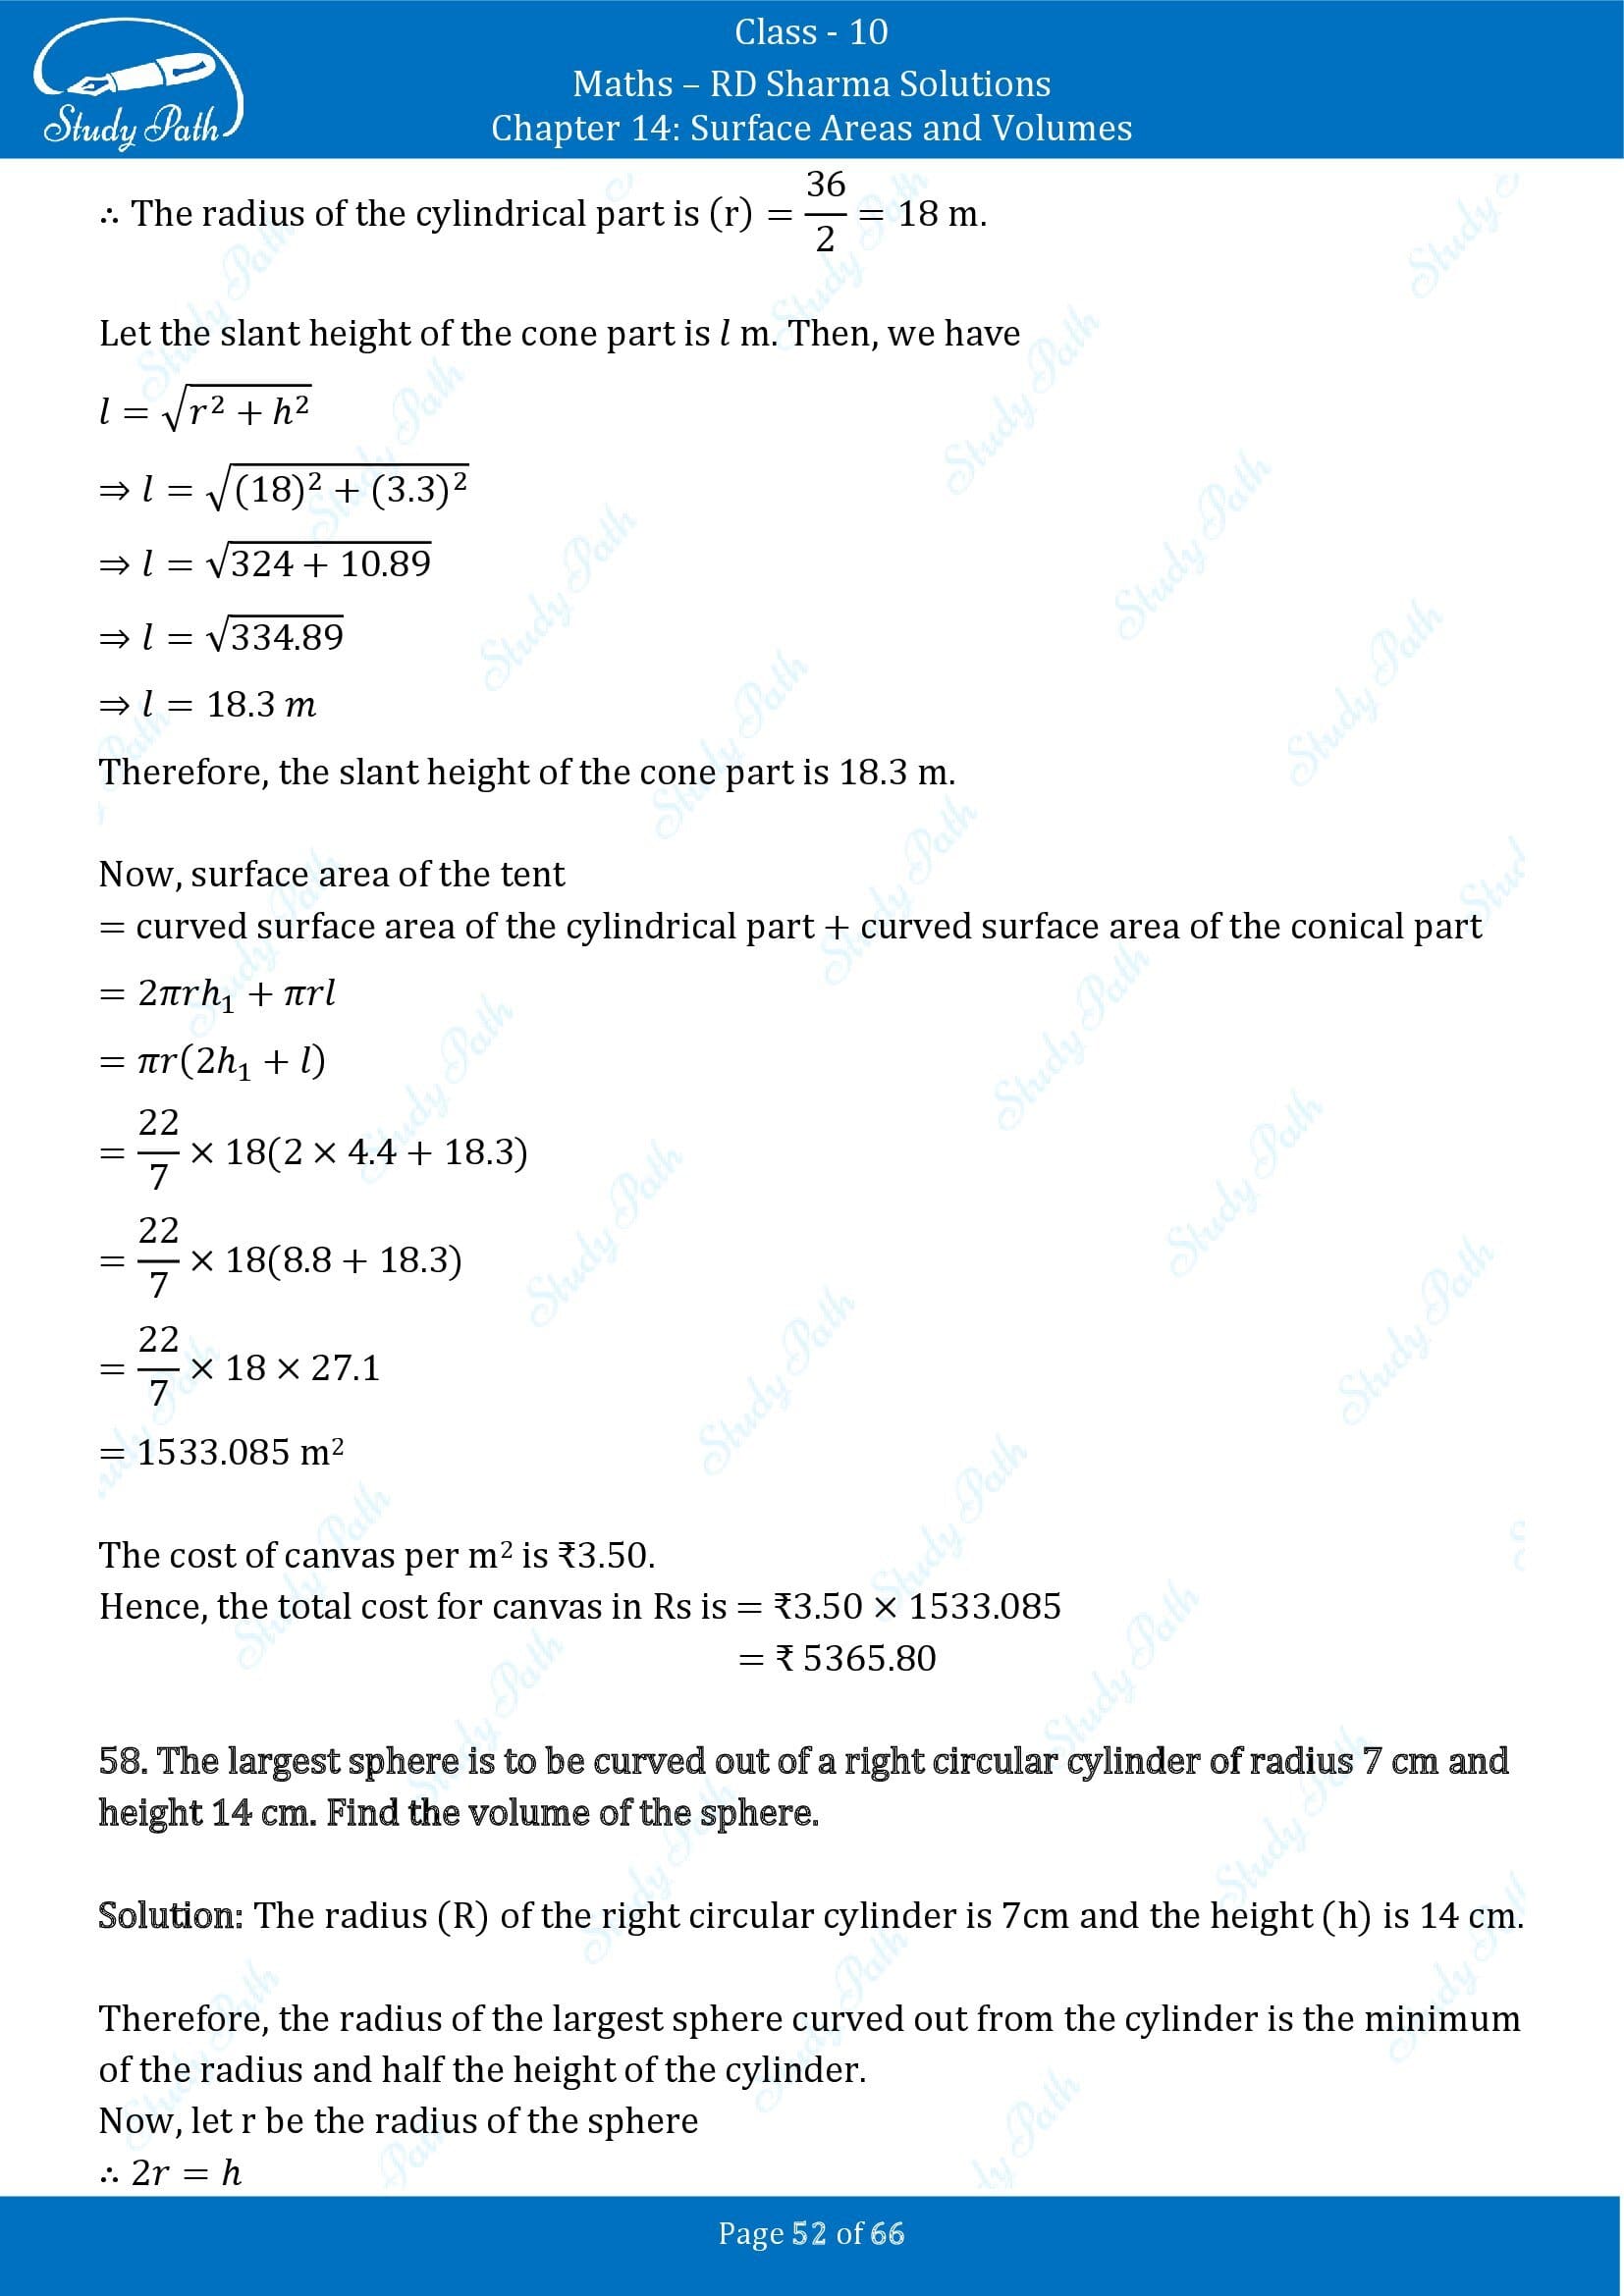 RD Sharma Solutions Class 10 Chapter 14 Surface Areas and Volumes Exercise 14.1 00052